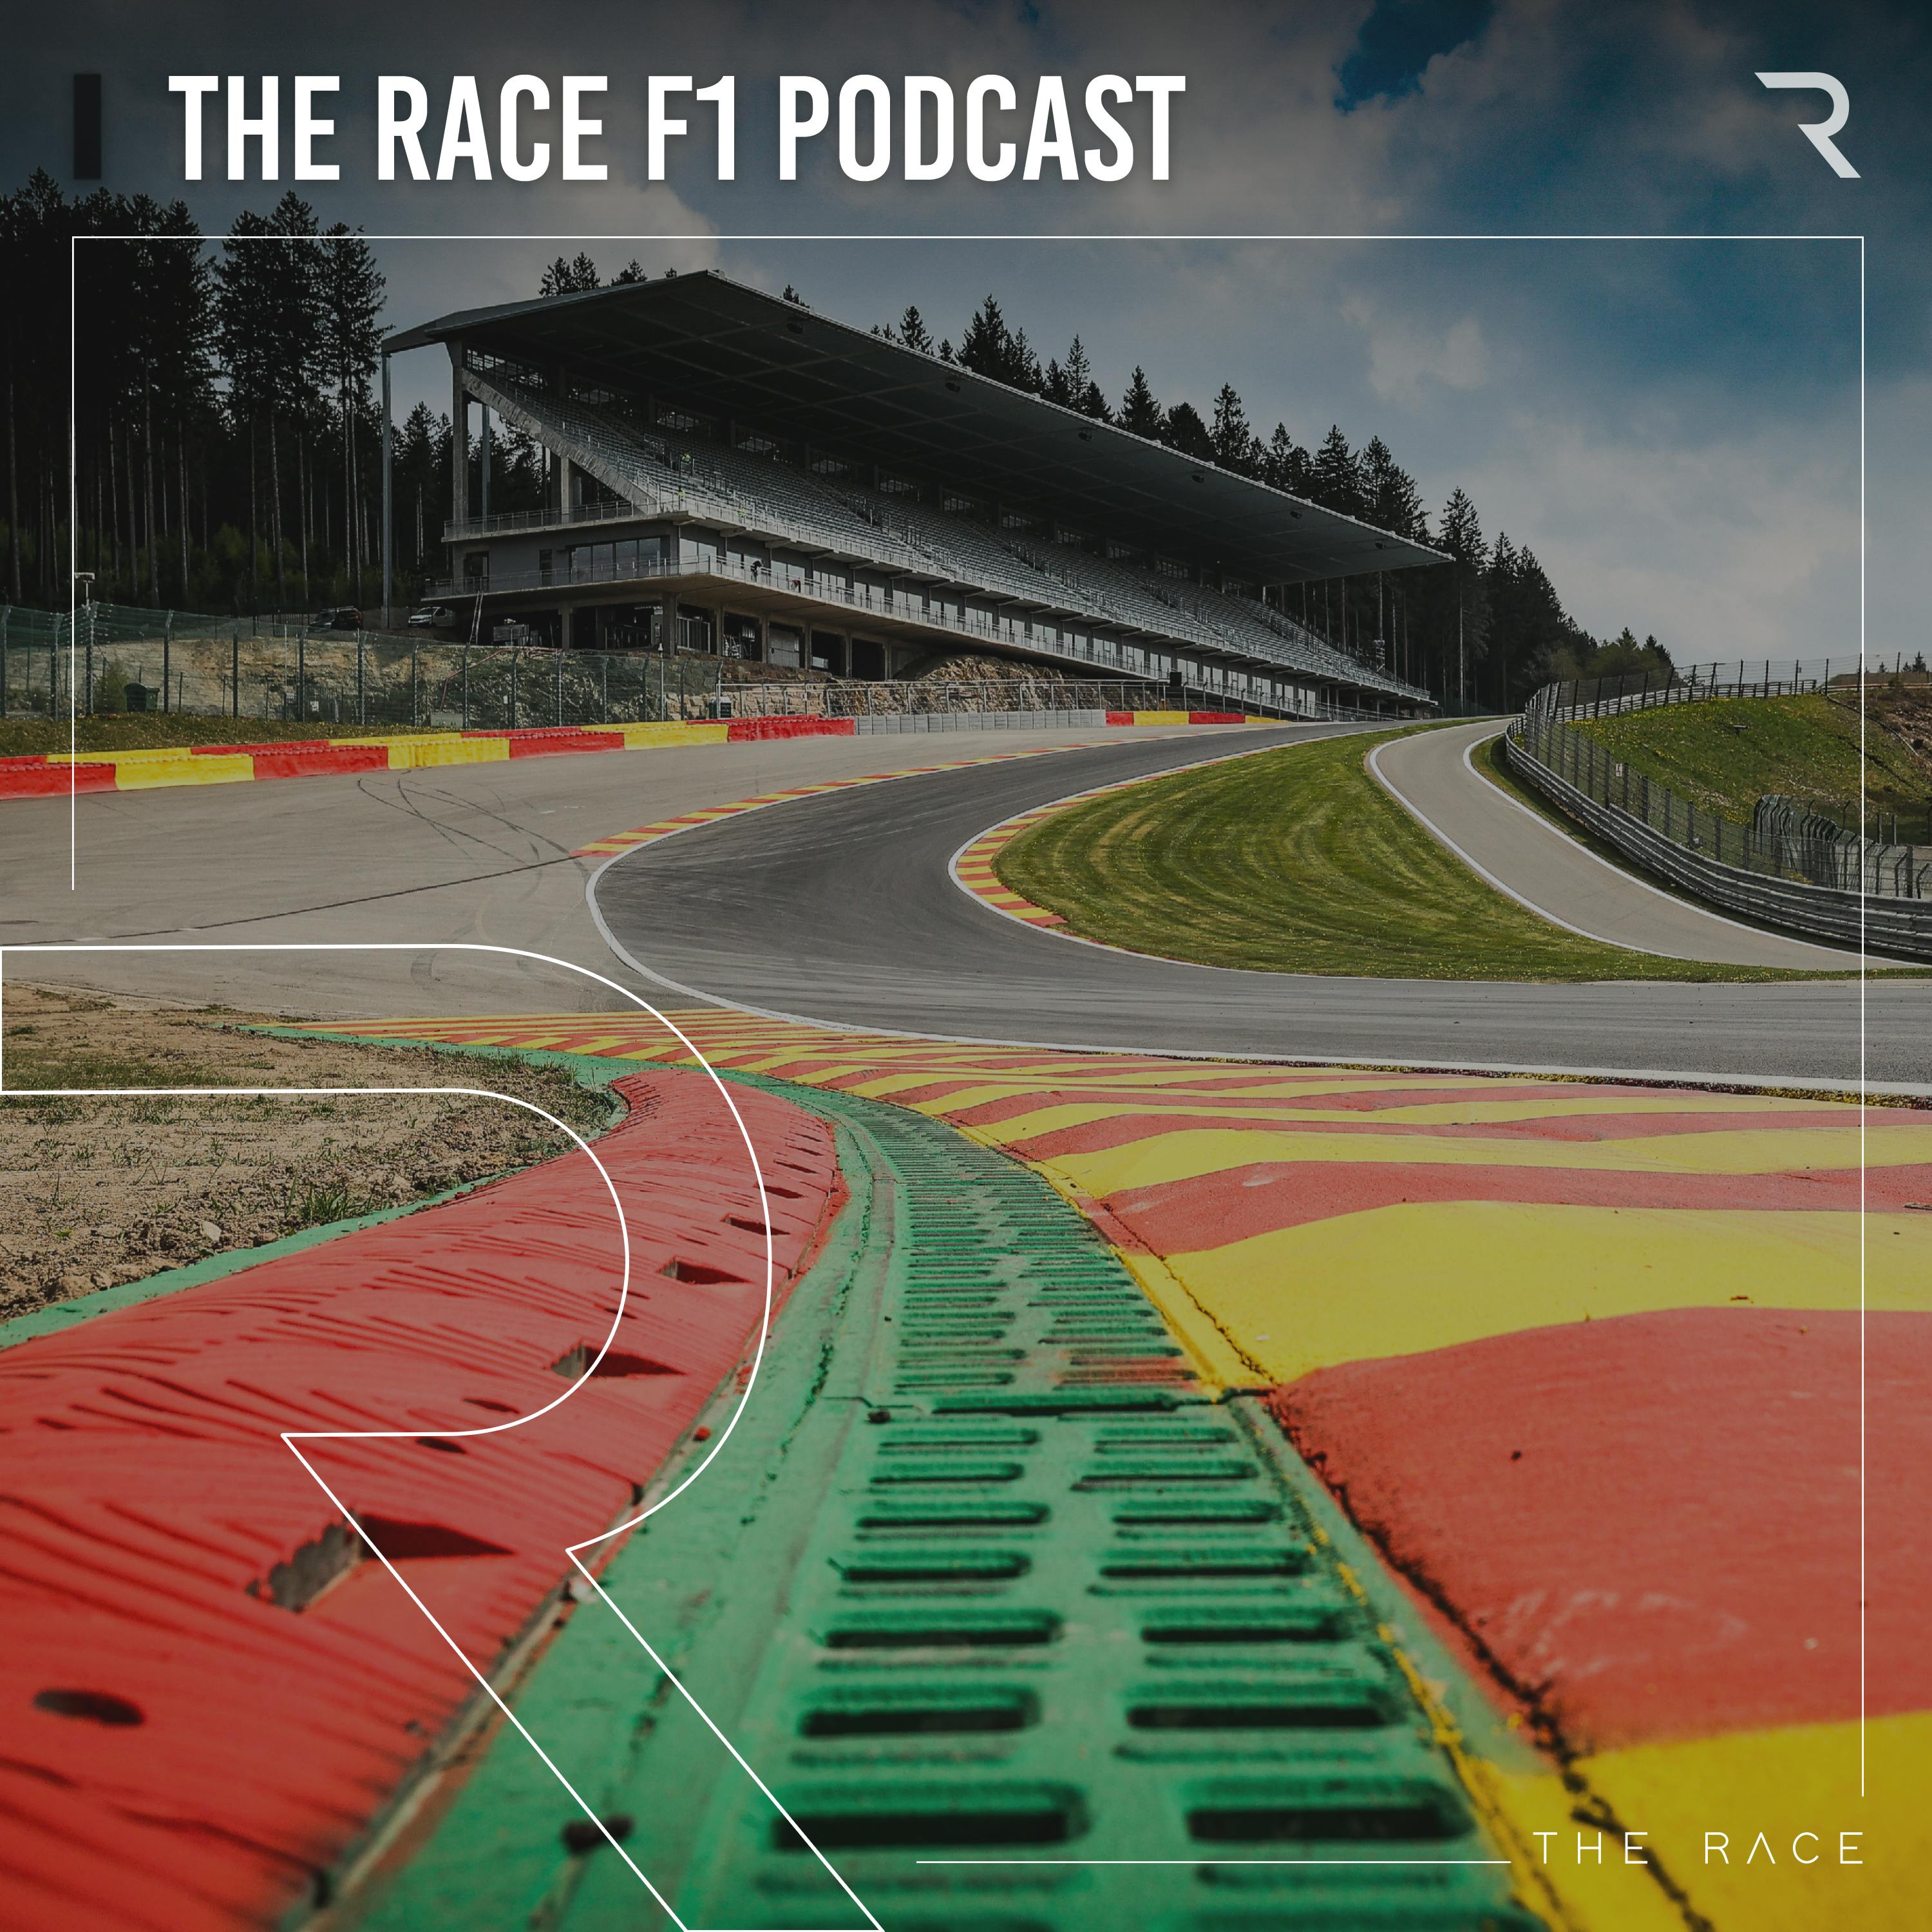 F1 is back - what to expect from Spa